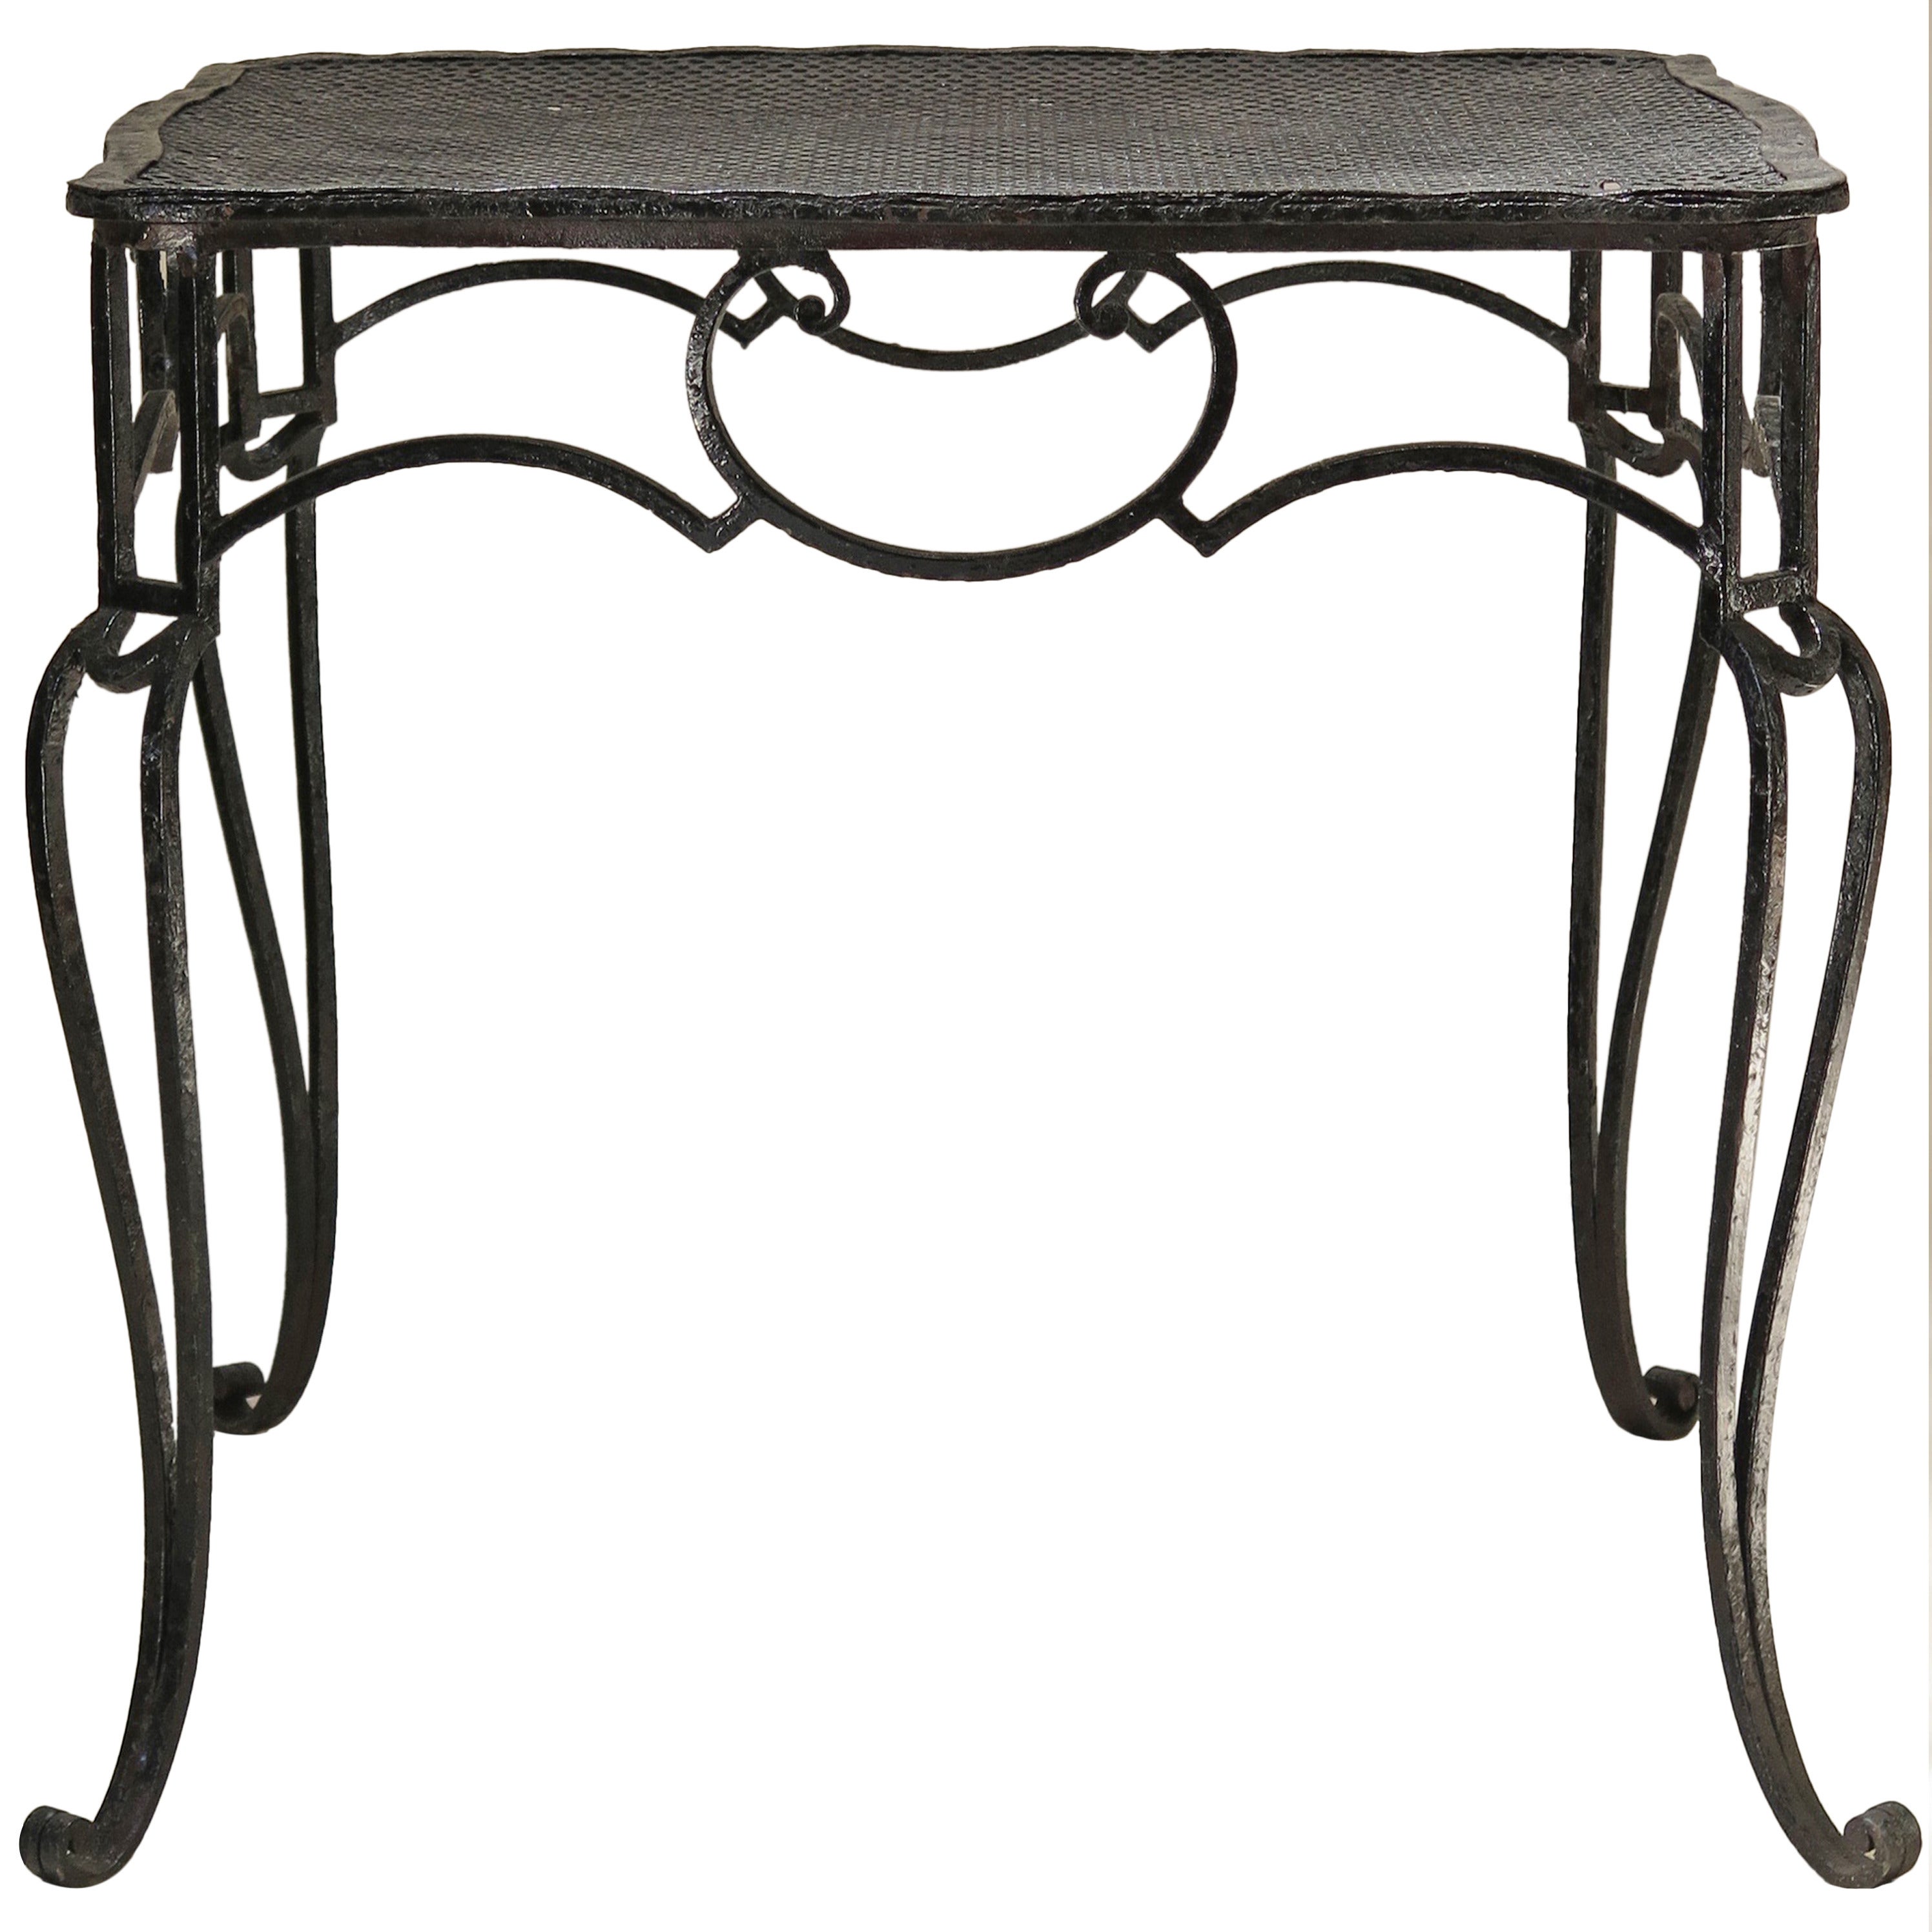 Baroque Wrought Iron Table by J.-C. Moreux - France, 1930s